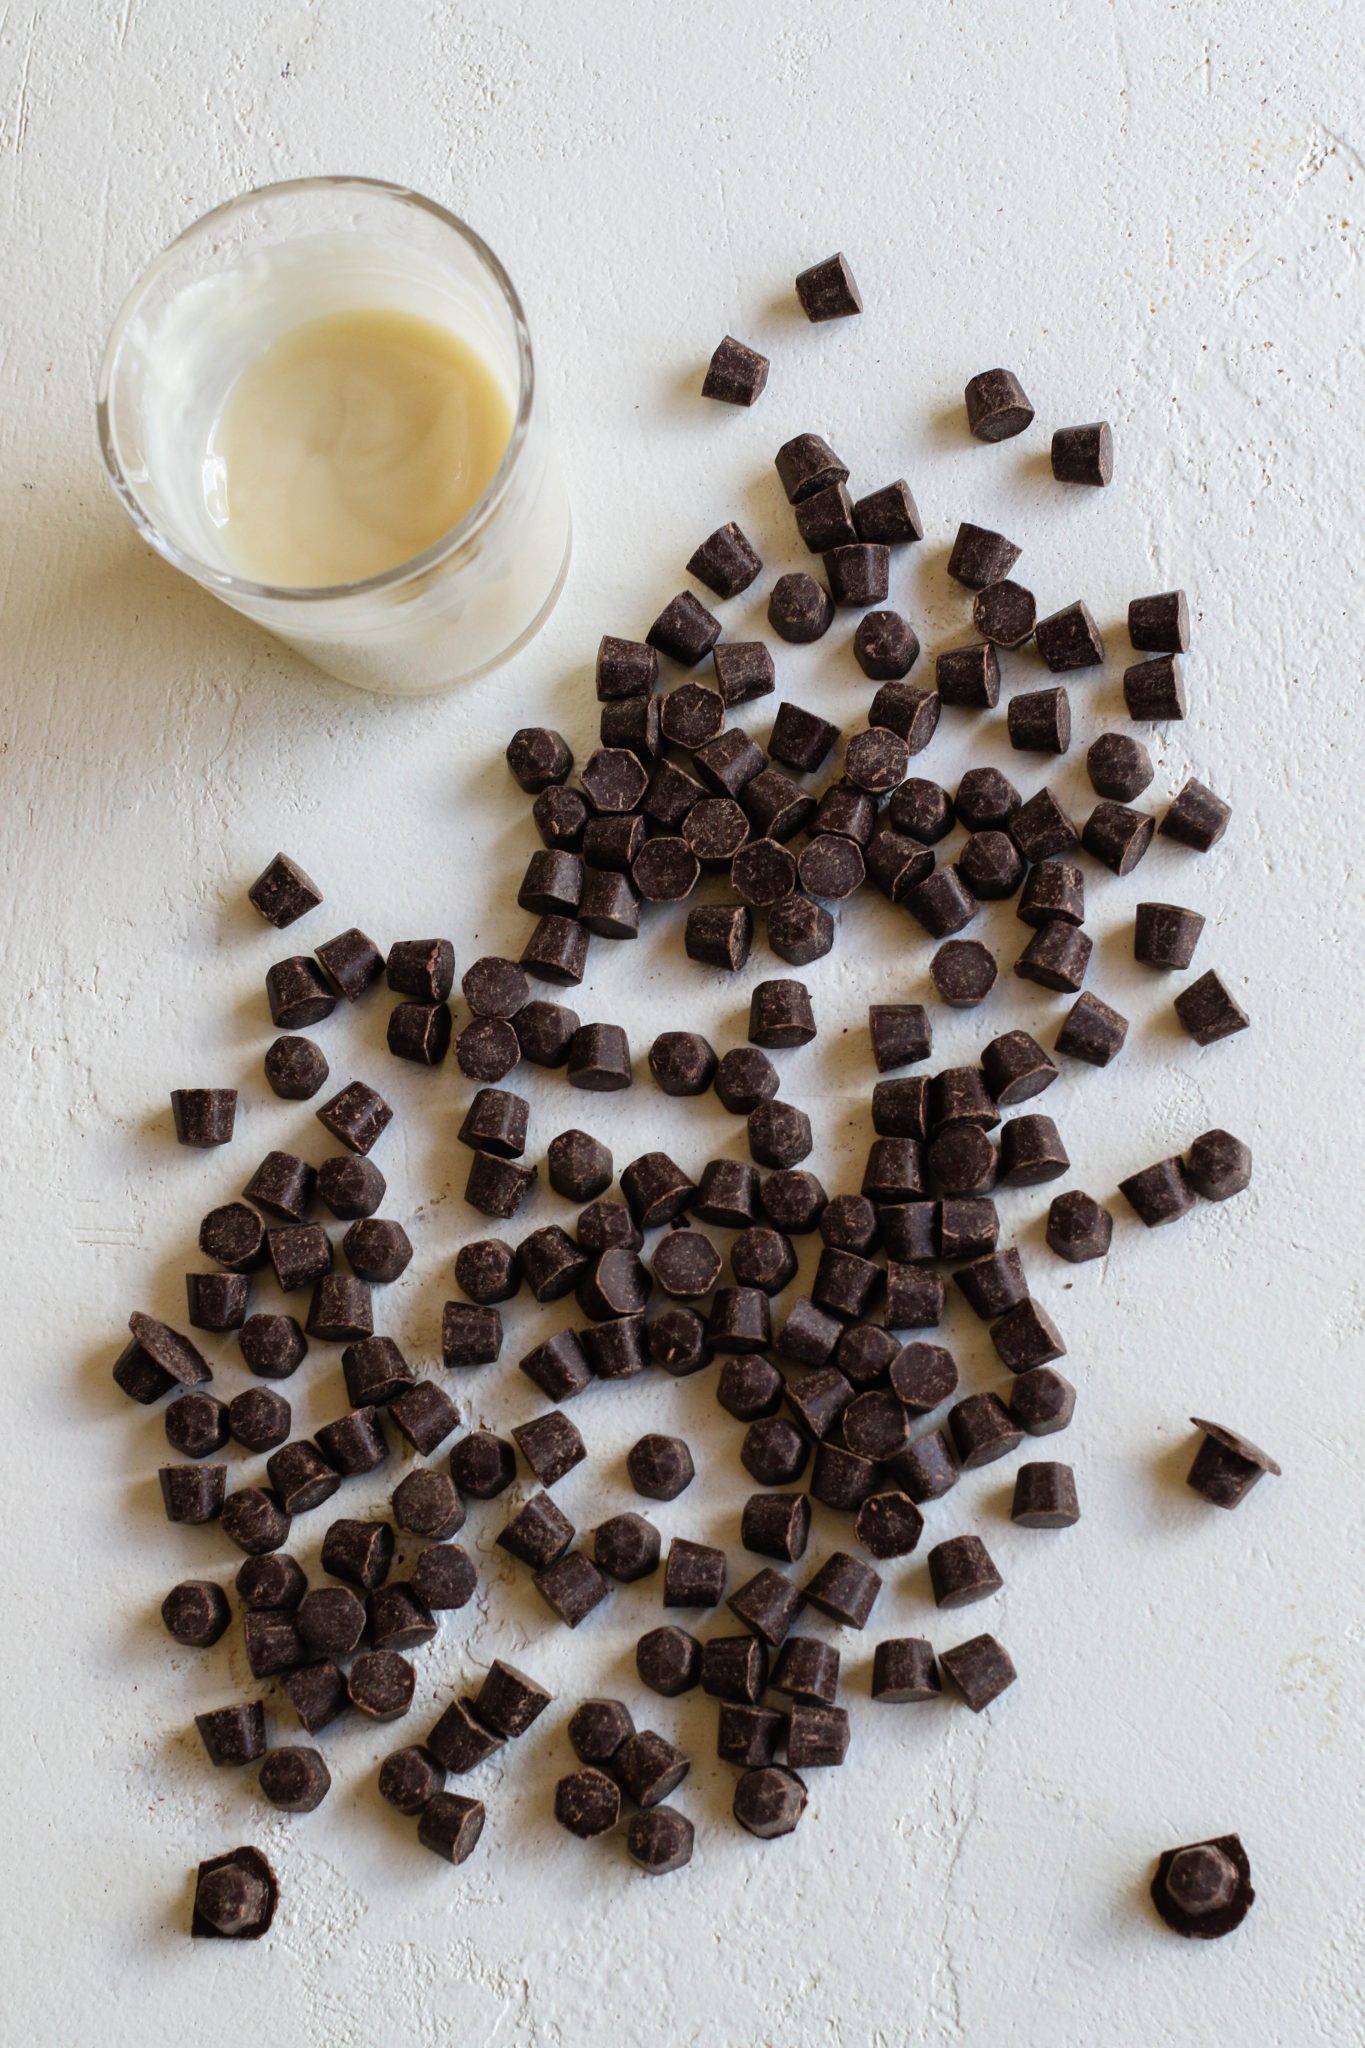 coconut butter and dark chocolate chips by Flora & Vino